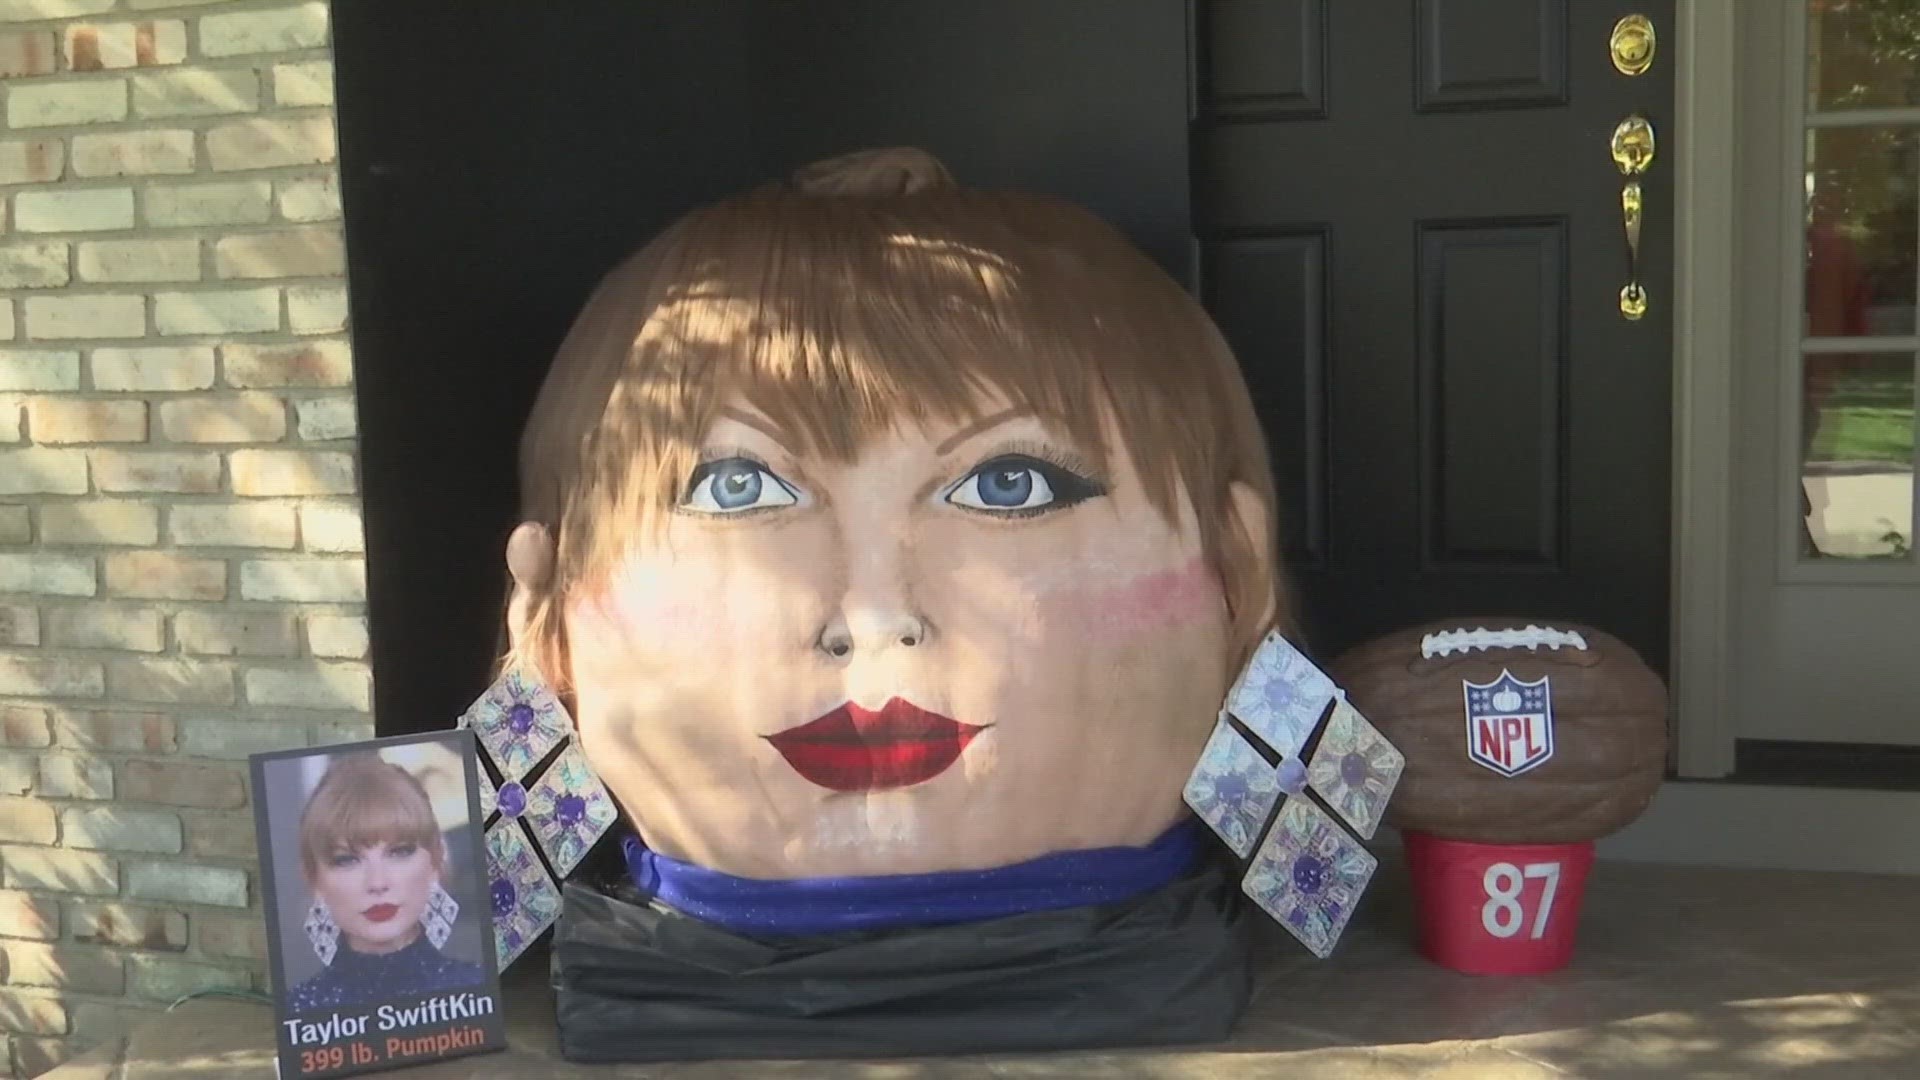 A Dublin artist has taken pumpkin decorating to a whole new level with this year’s celebrity pumpkin display.